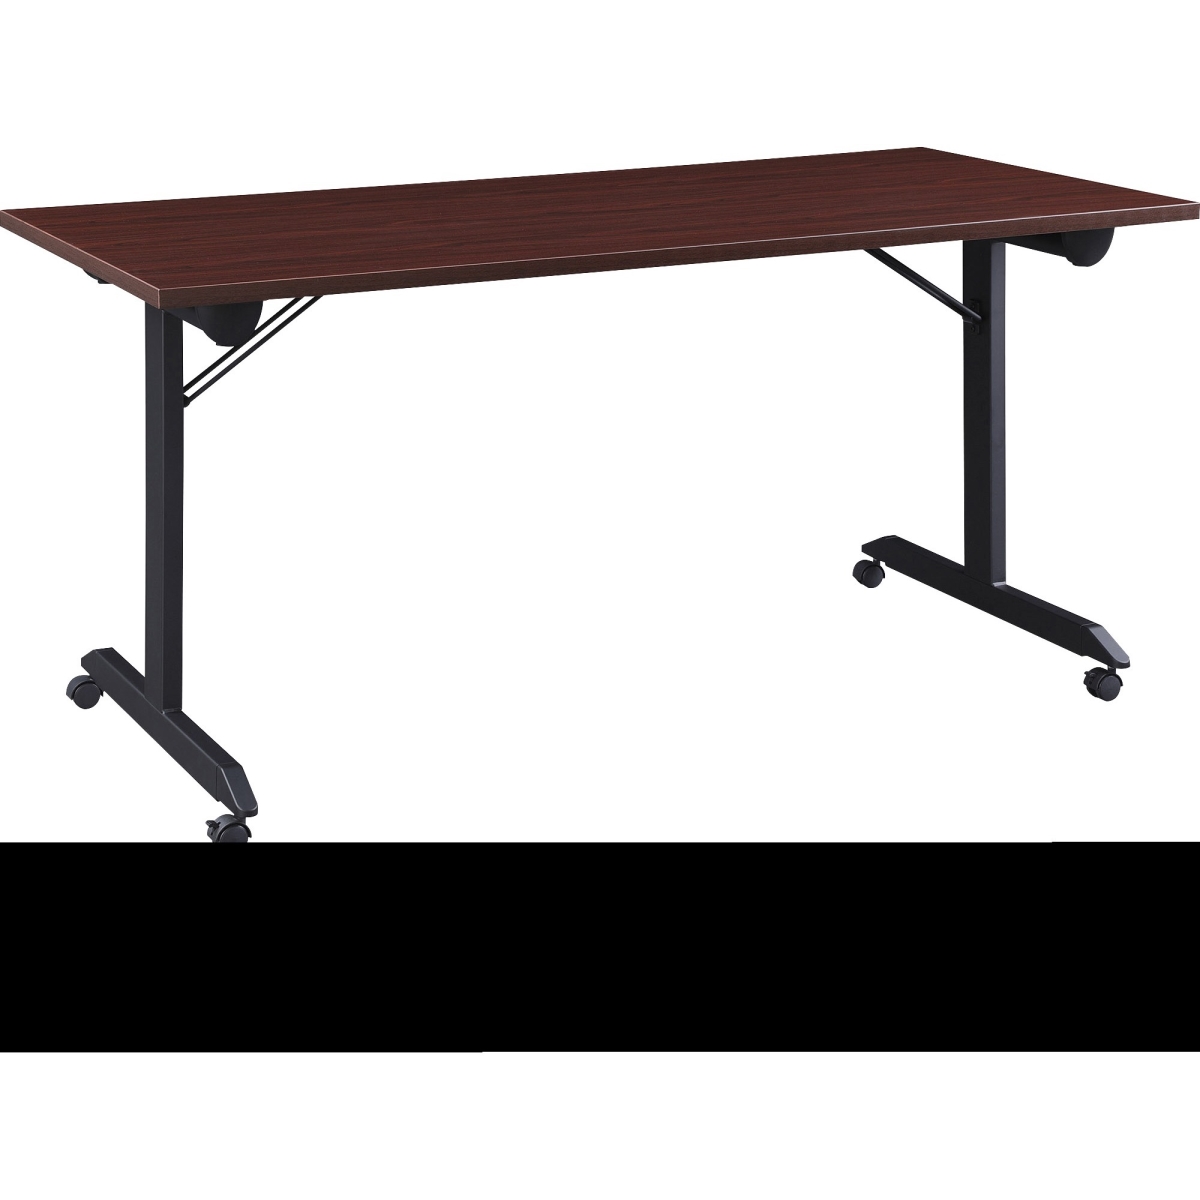 Picture of Lorell LLR60740 63 in. Mobile Folding Training Table - Brown